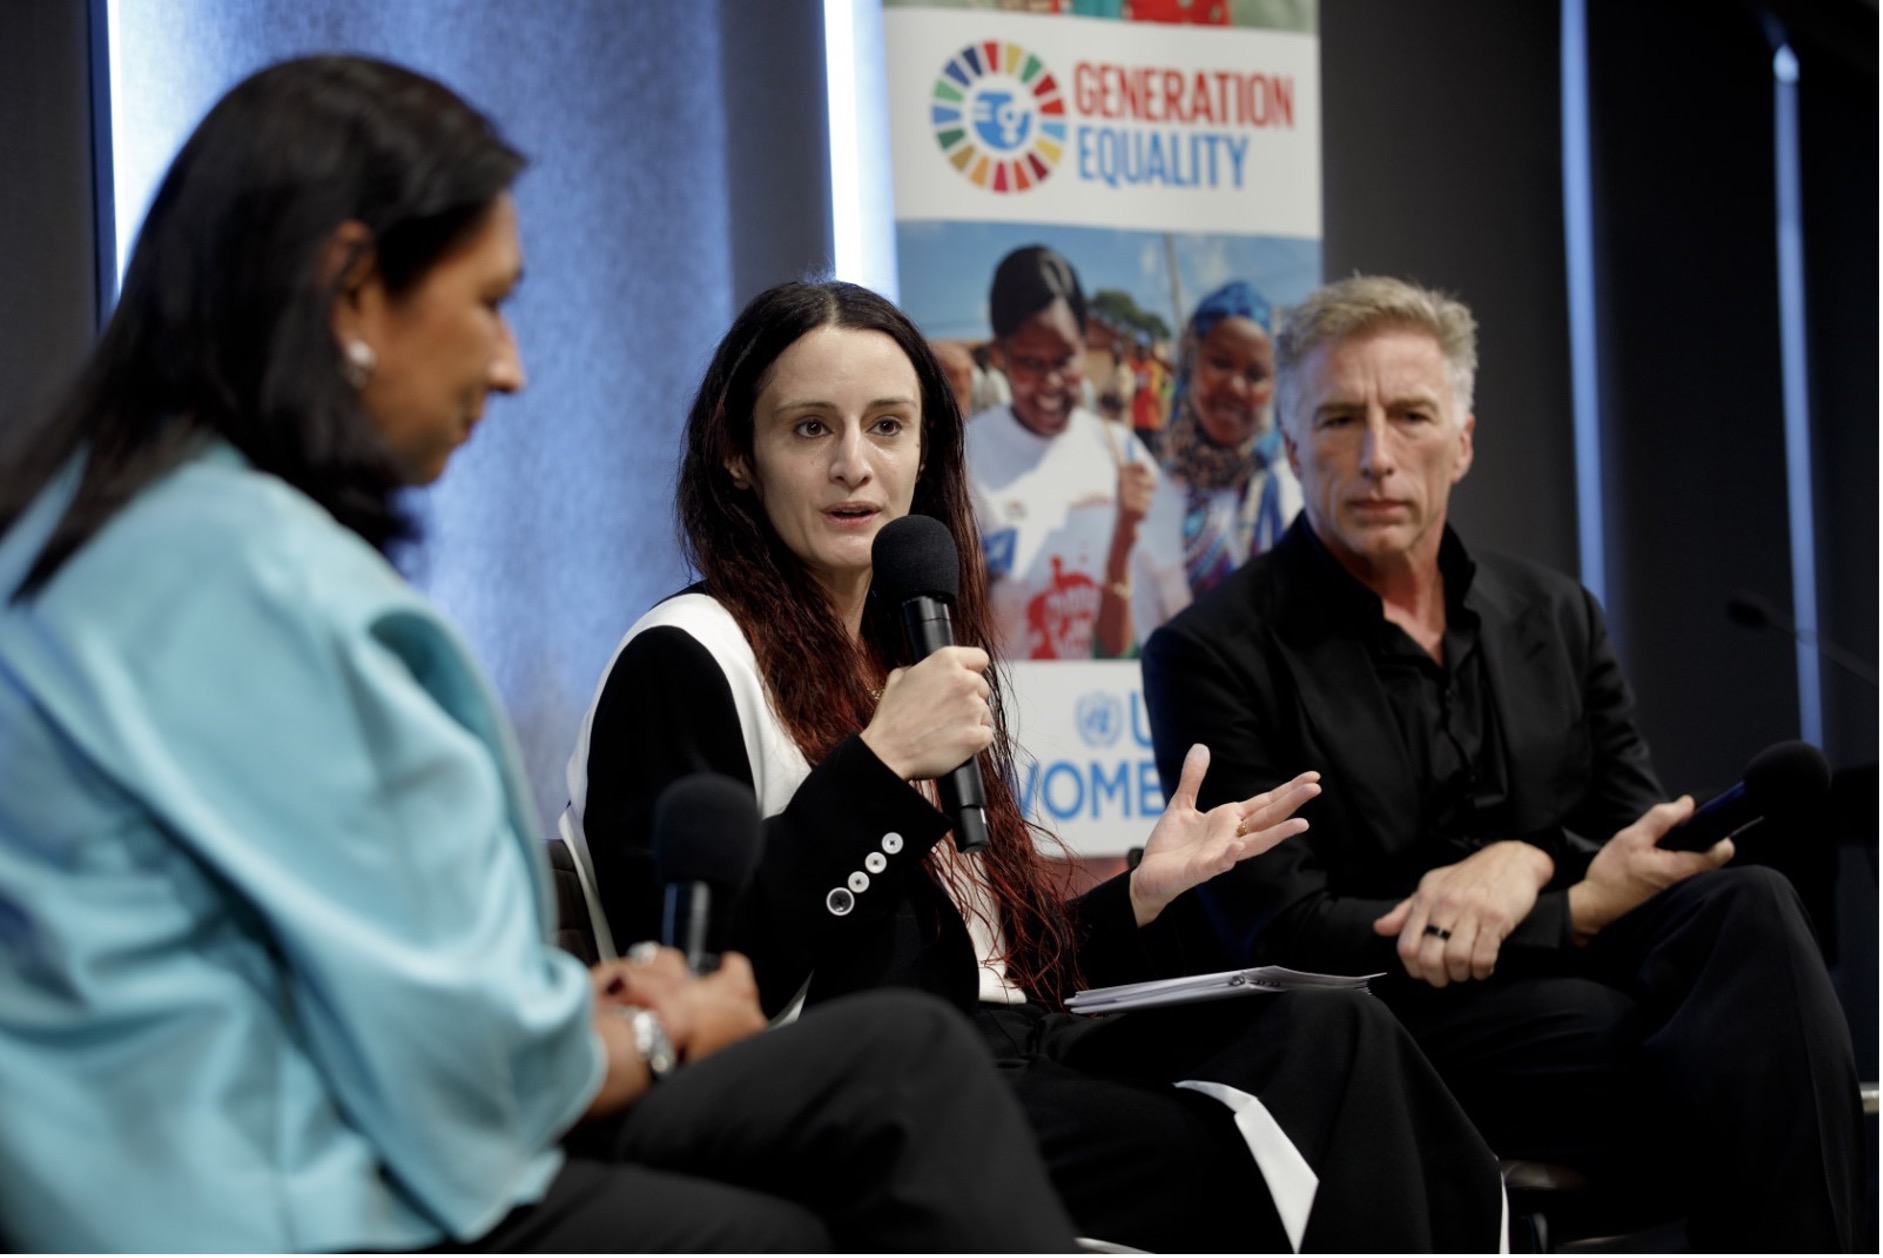 UN Women Deputy Executive Director Ms. Anita Bhatia, Koç Holding Board Member Ms. İpek Kiraç, and Logitech CEO Mr. Bracken Darrell in conversation with one another. There is a Generation Equality banner in the background.